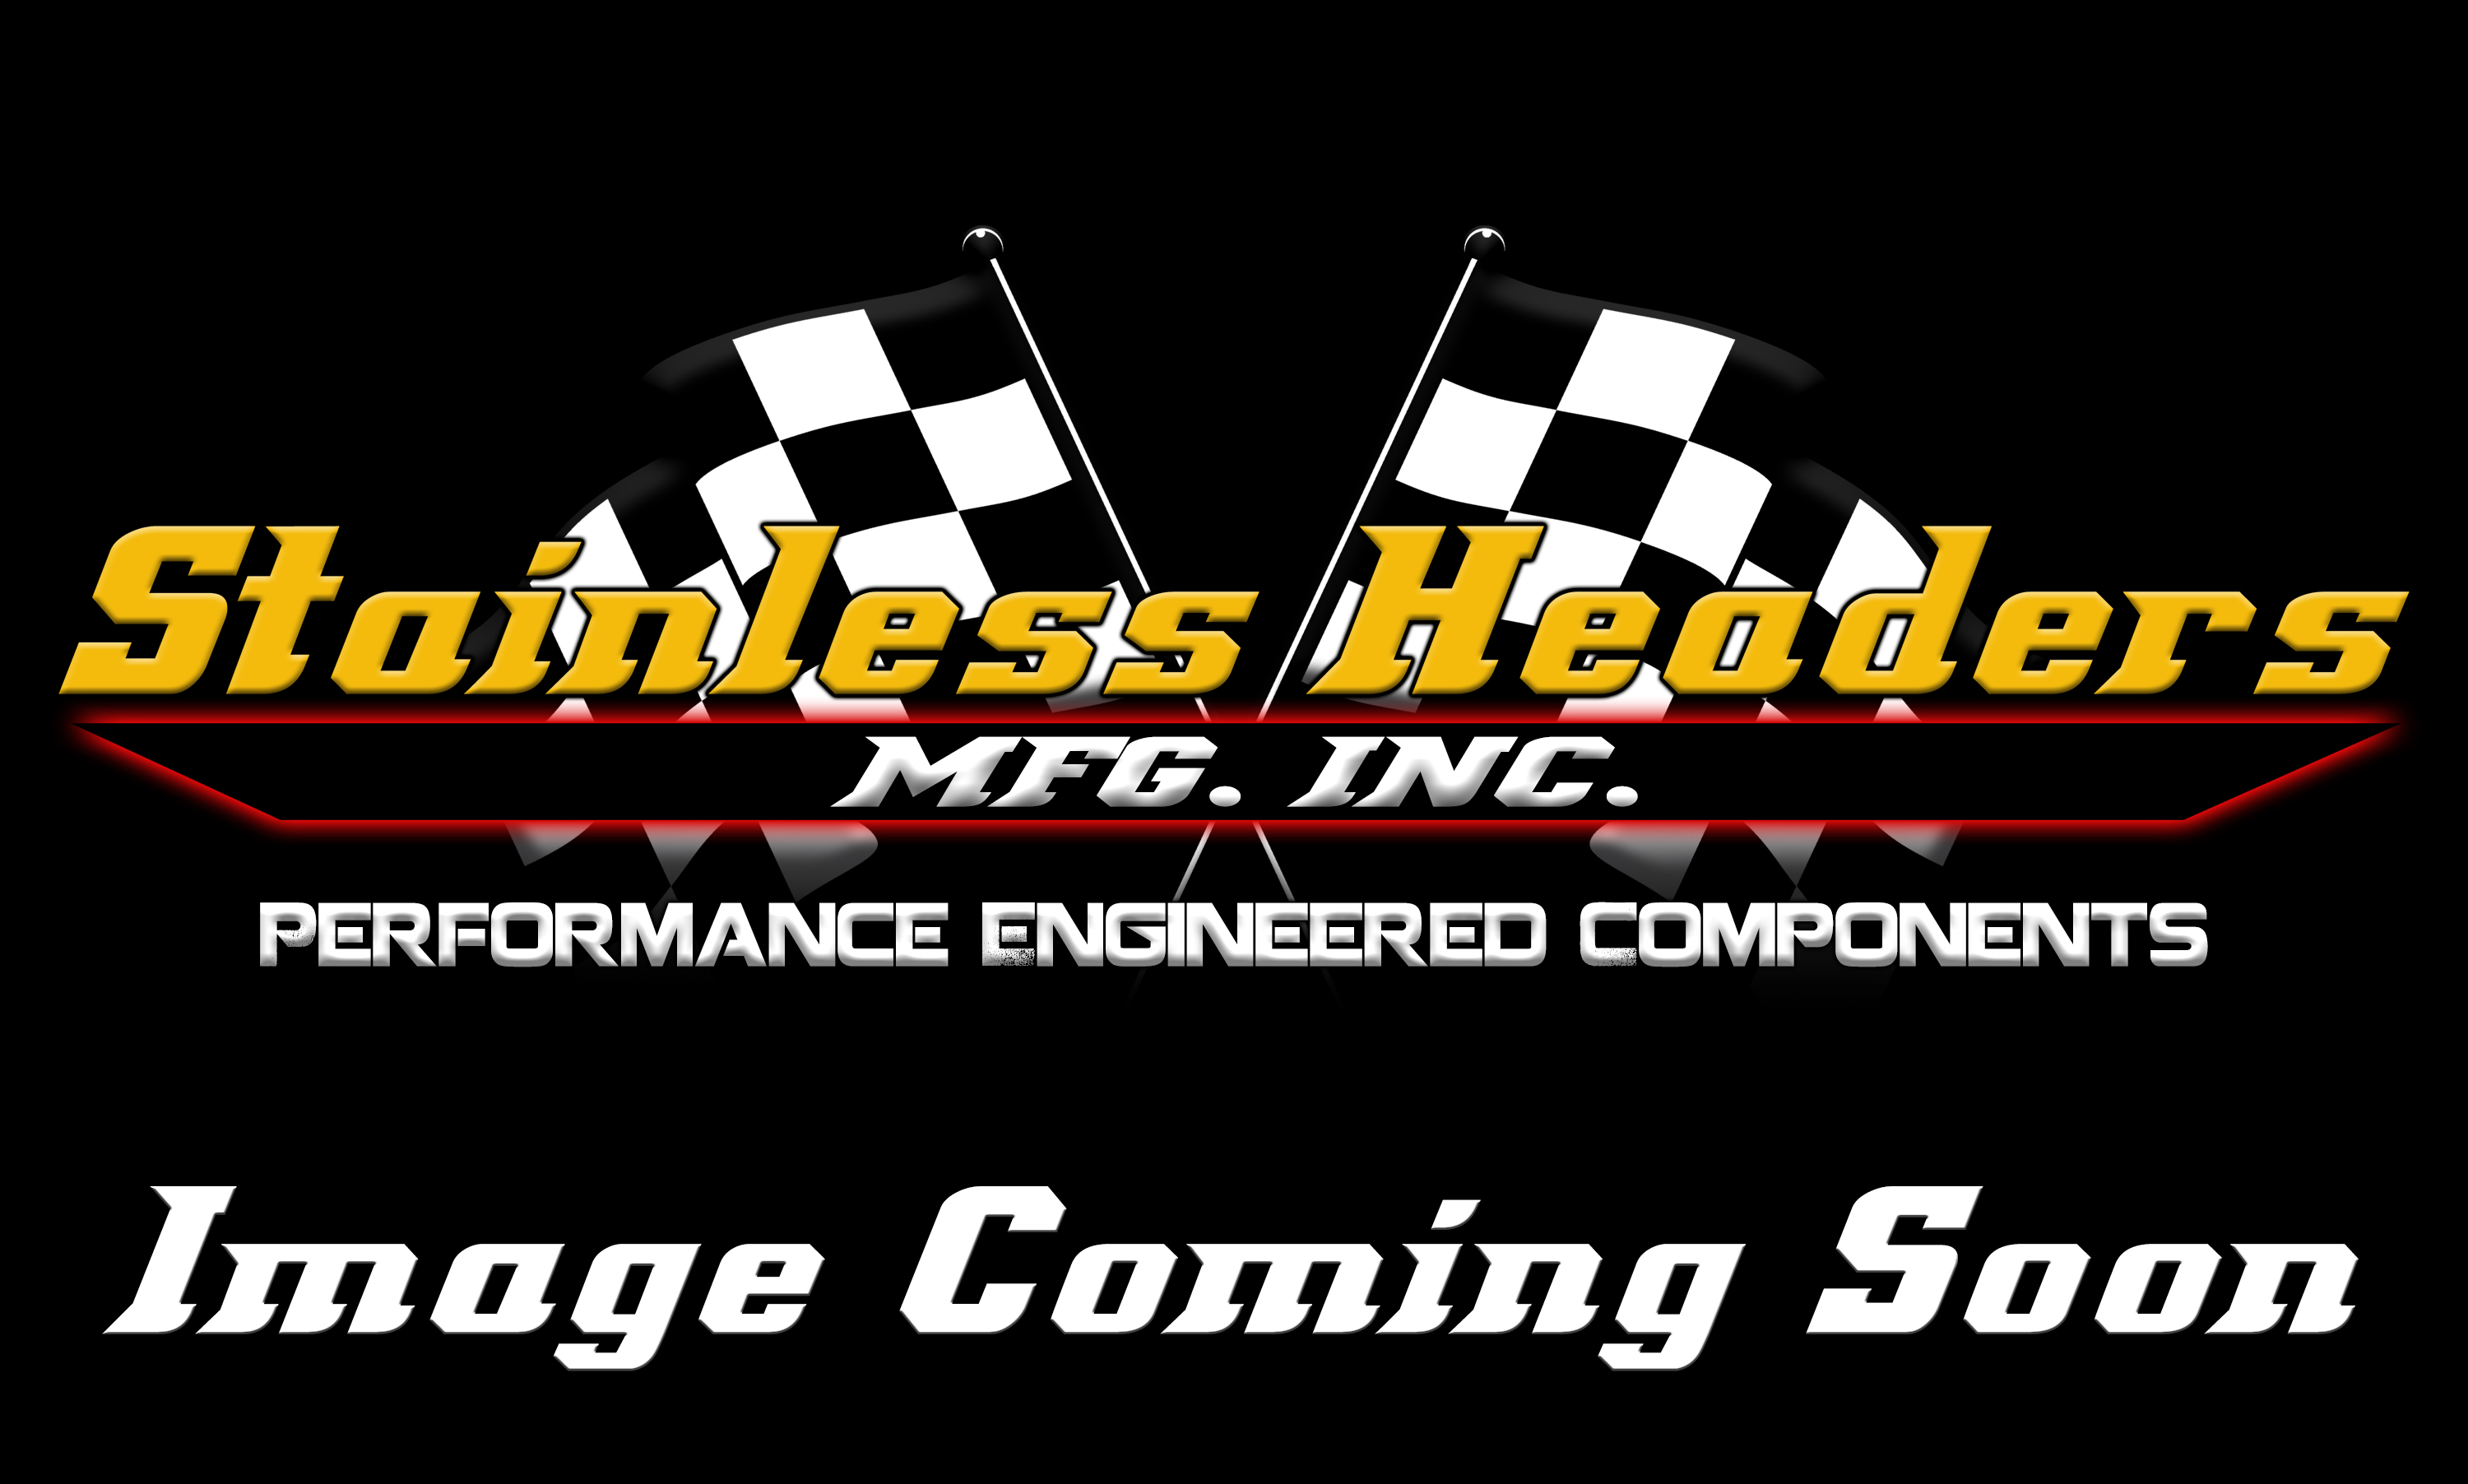 CompTurbo Technologies - CTR4276R-7685 Mid Frame Oil Lubricated 2.0 Turbocharger (1320 HP) - Image 1